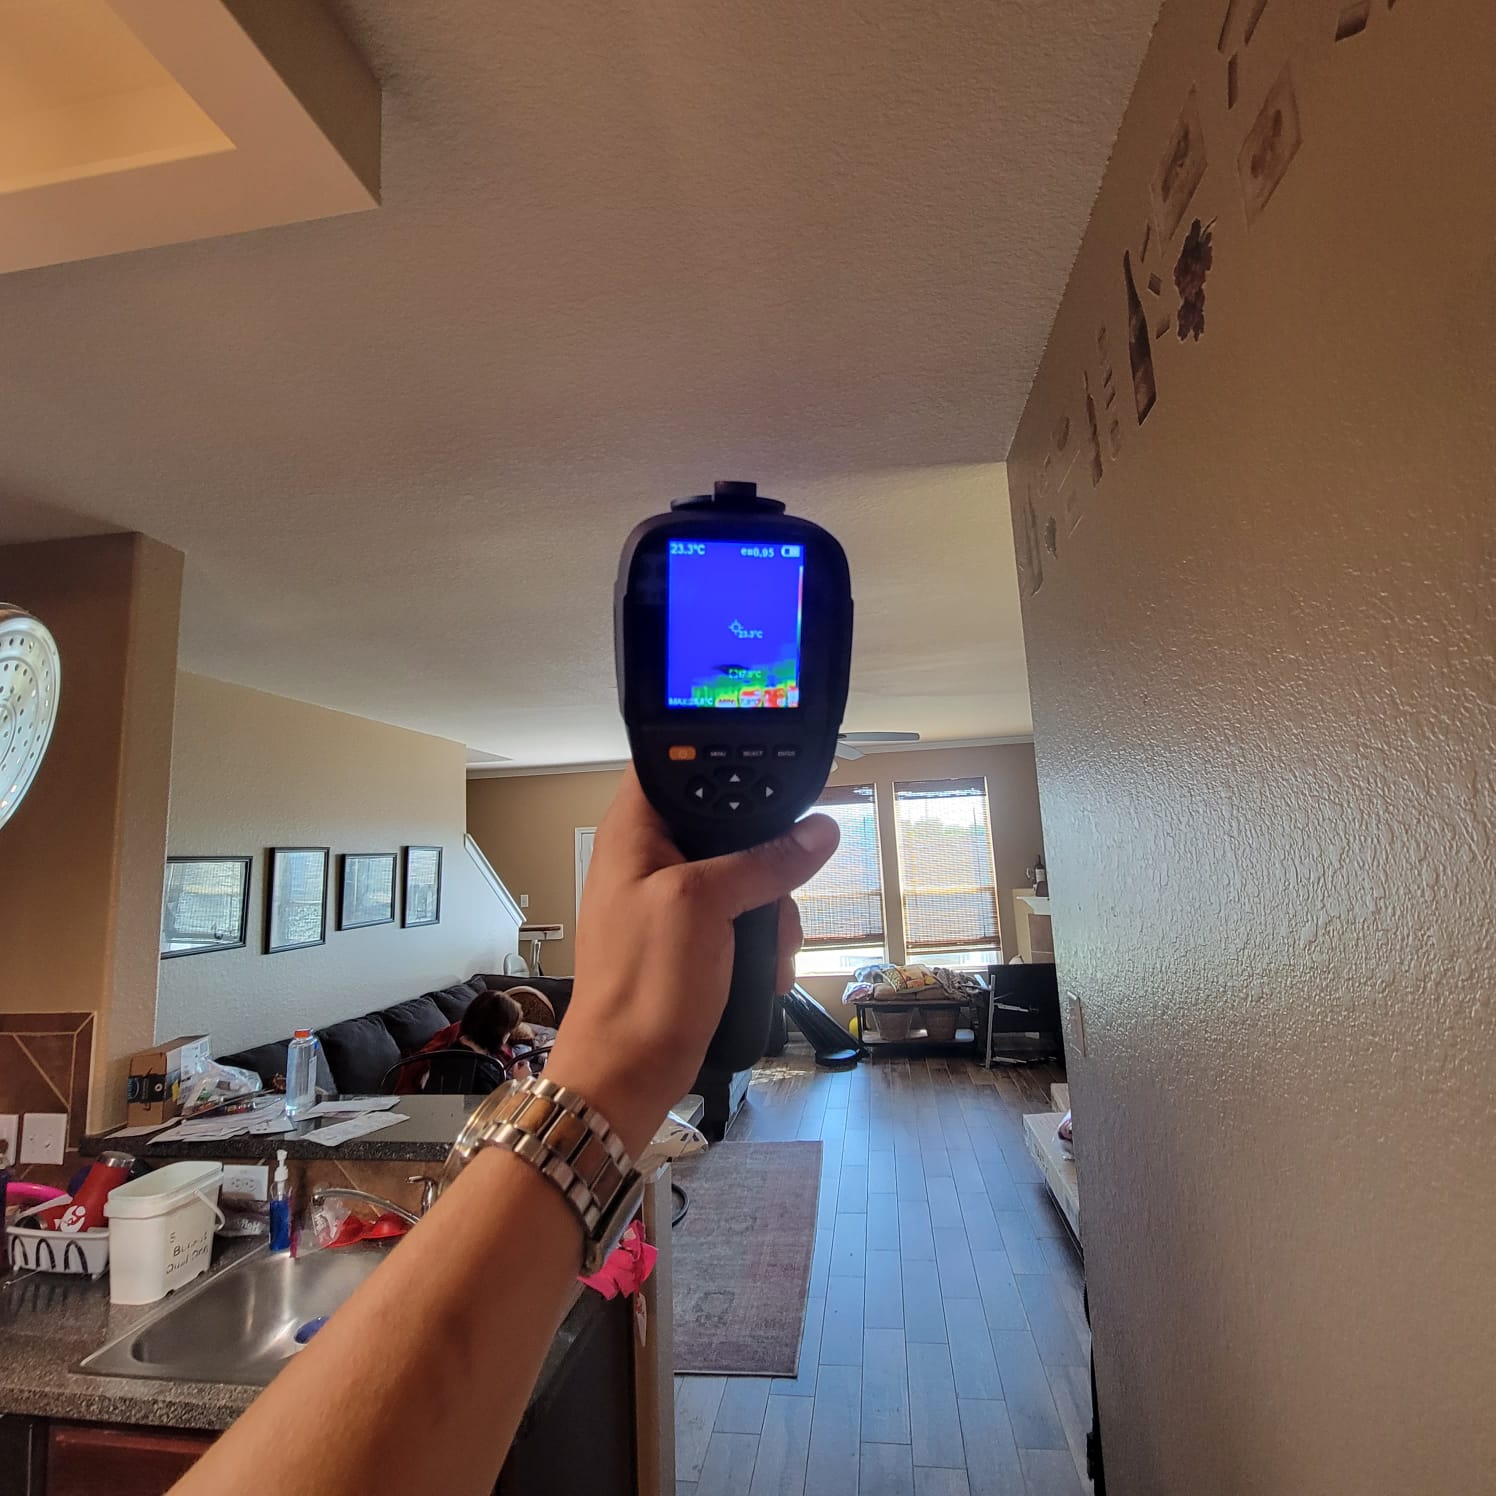 After an AC leak, we extracted all the water and moisture to dry out the property,‍ ran air movers and scrubbers, set containments as well as removed the damaged carpet and drywall